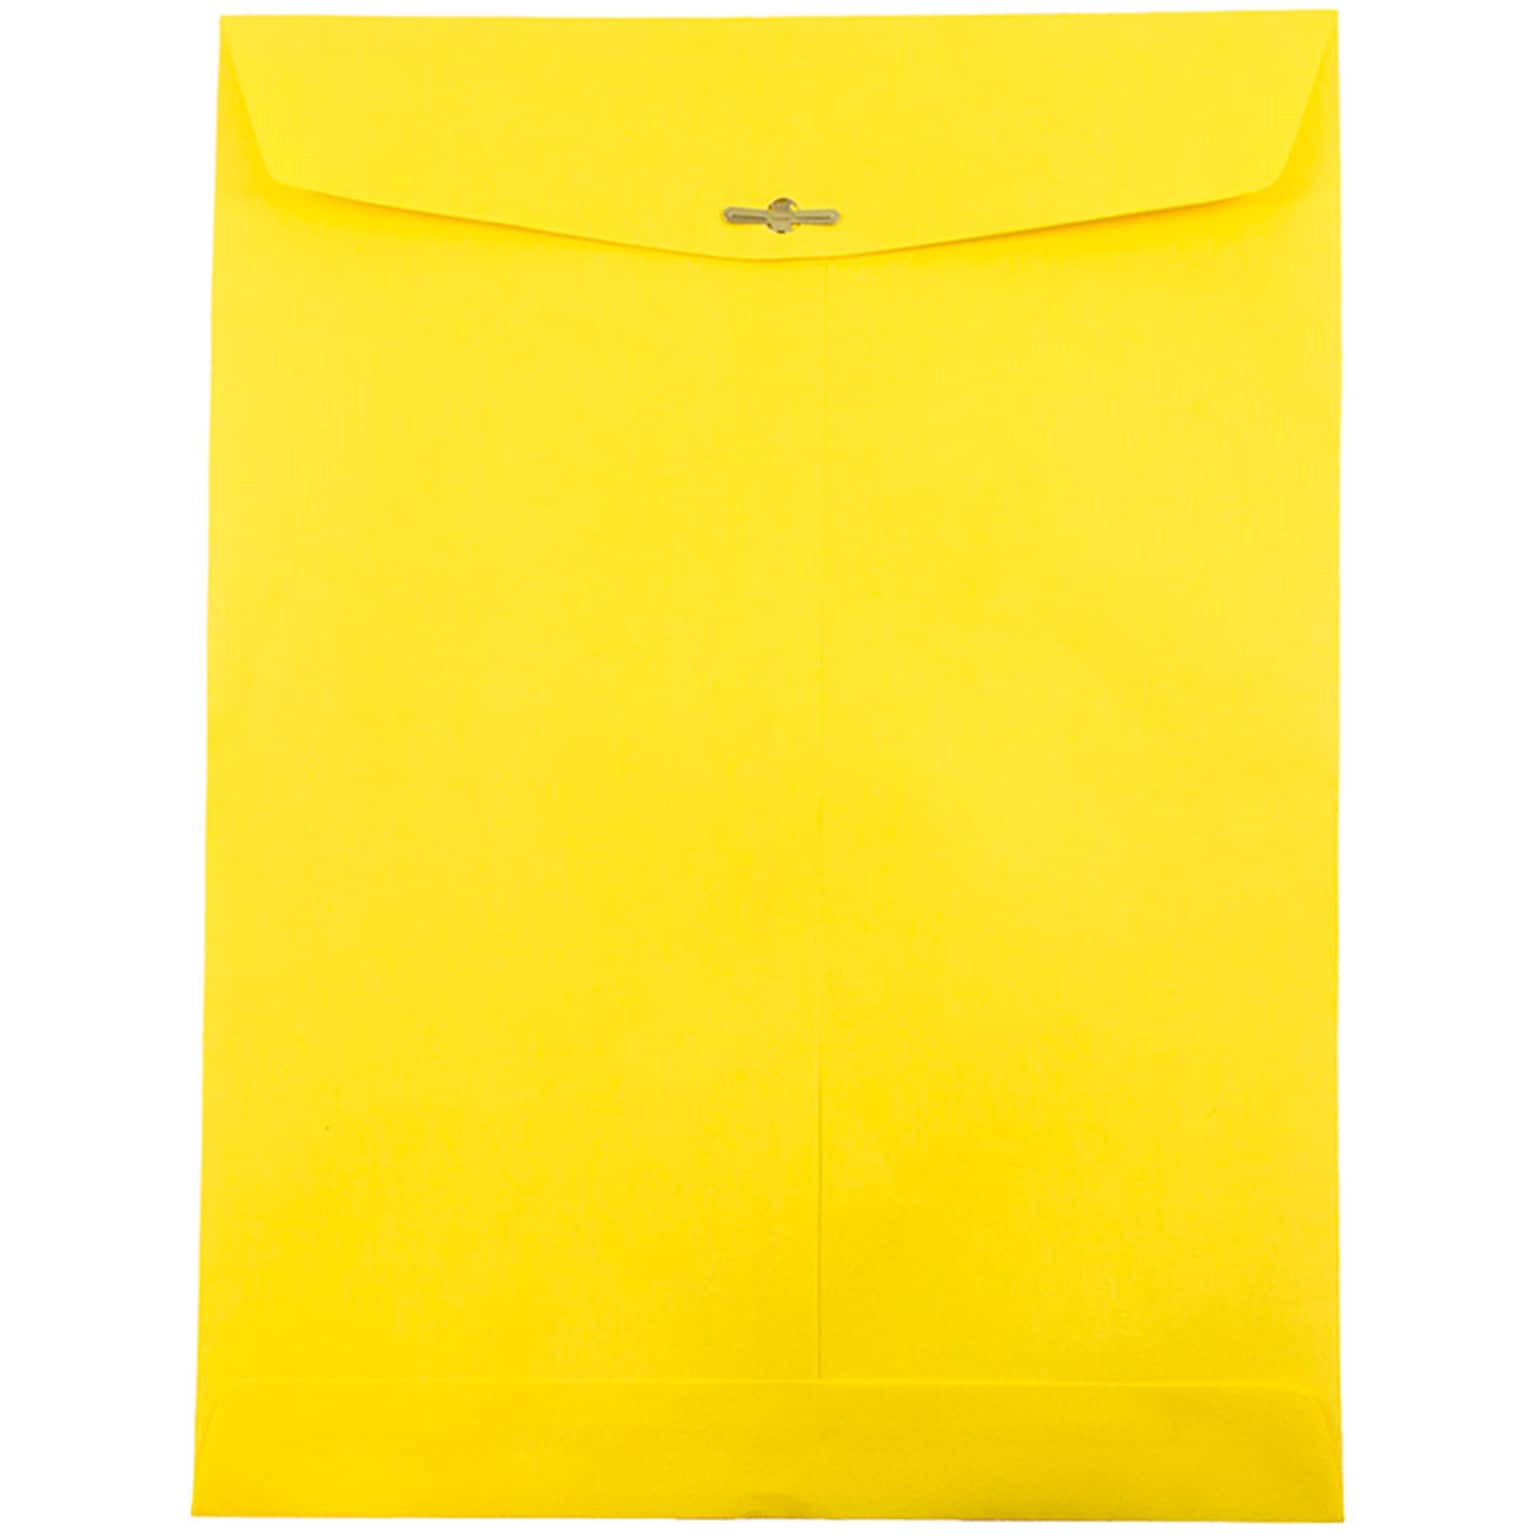 JAM Paper 10 x 13 Open End Catalog Colored Envelopes with Clasp Closure, Yellow Recycled, 10/Pack (900906710B)